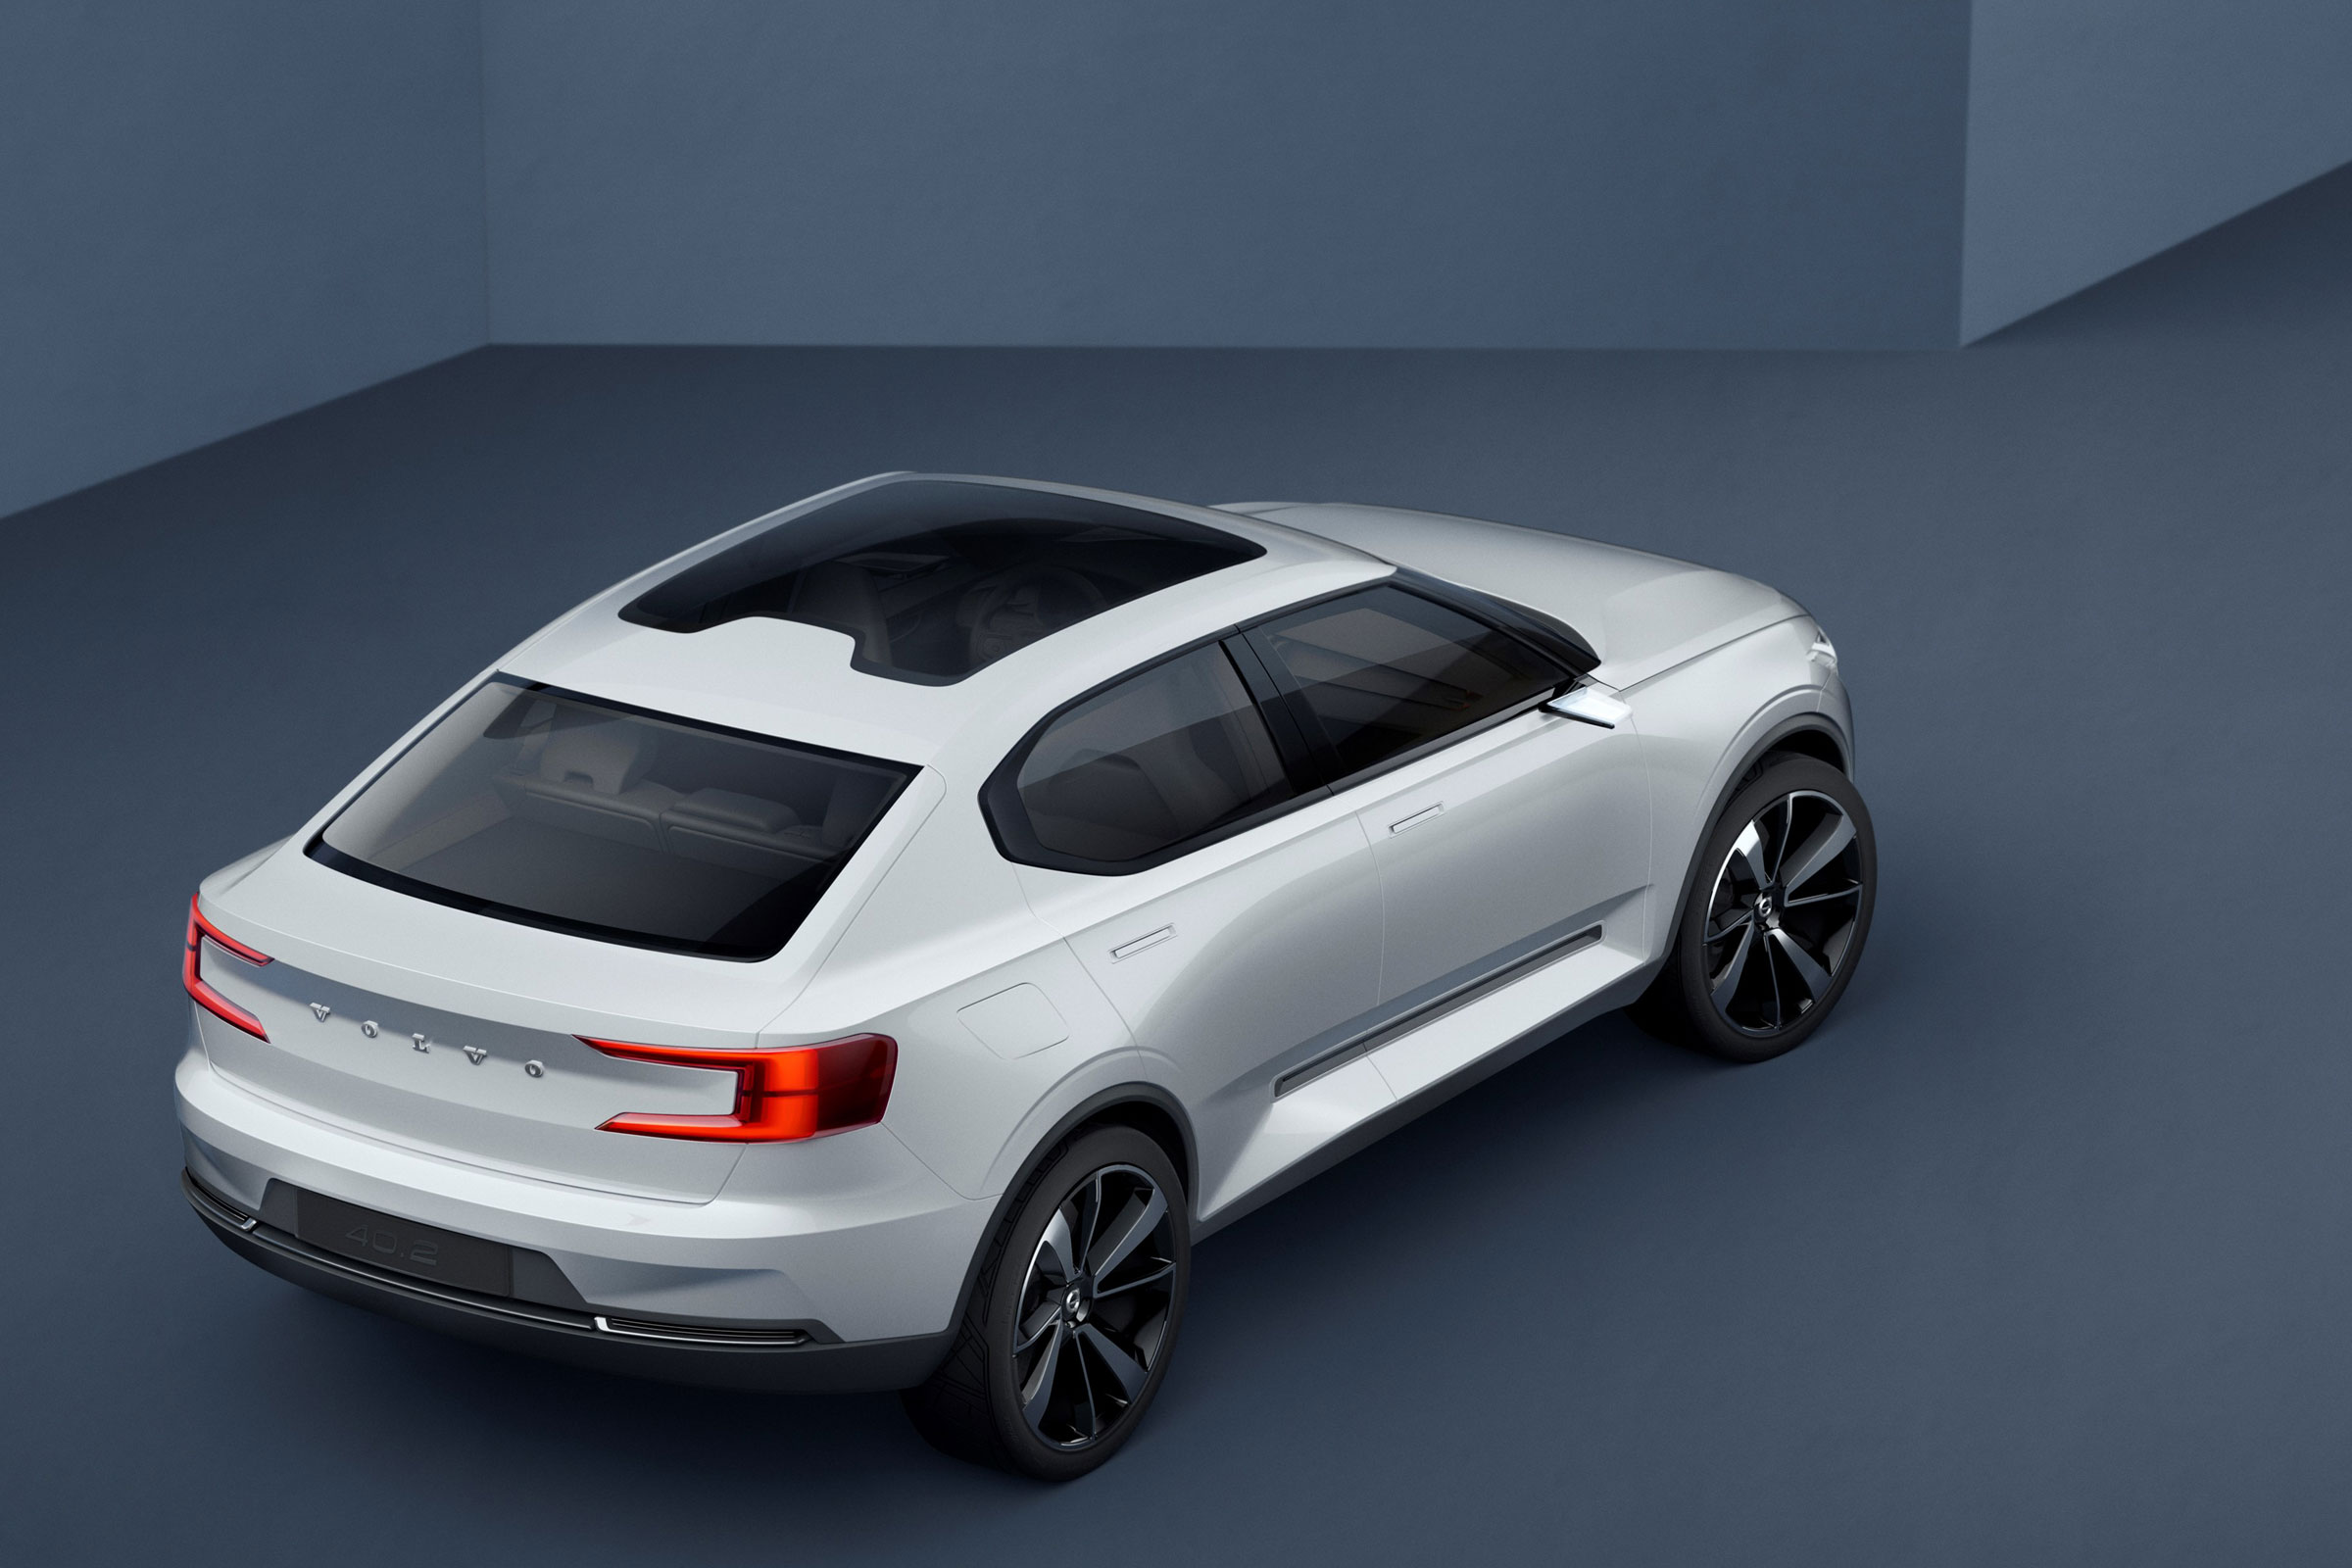 Predictably named Polestar 3 to debut in 2021 as a coupestyle electric